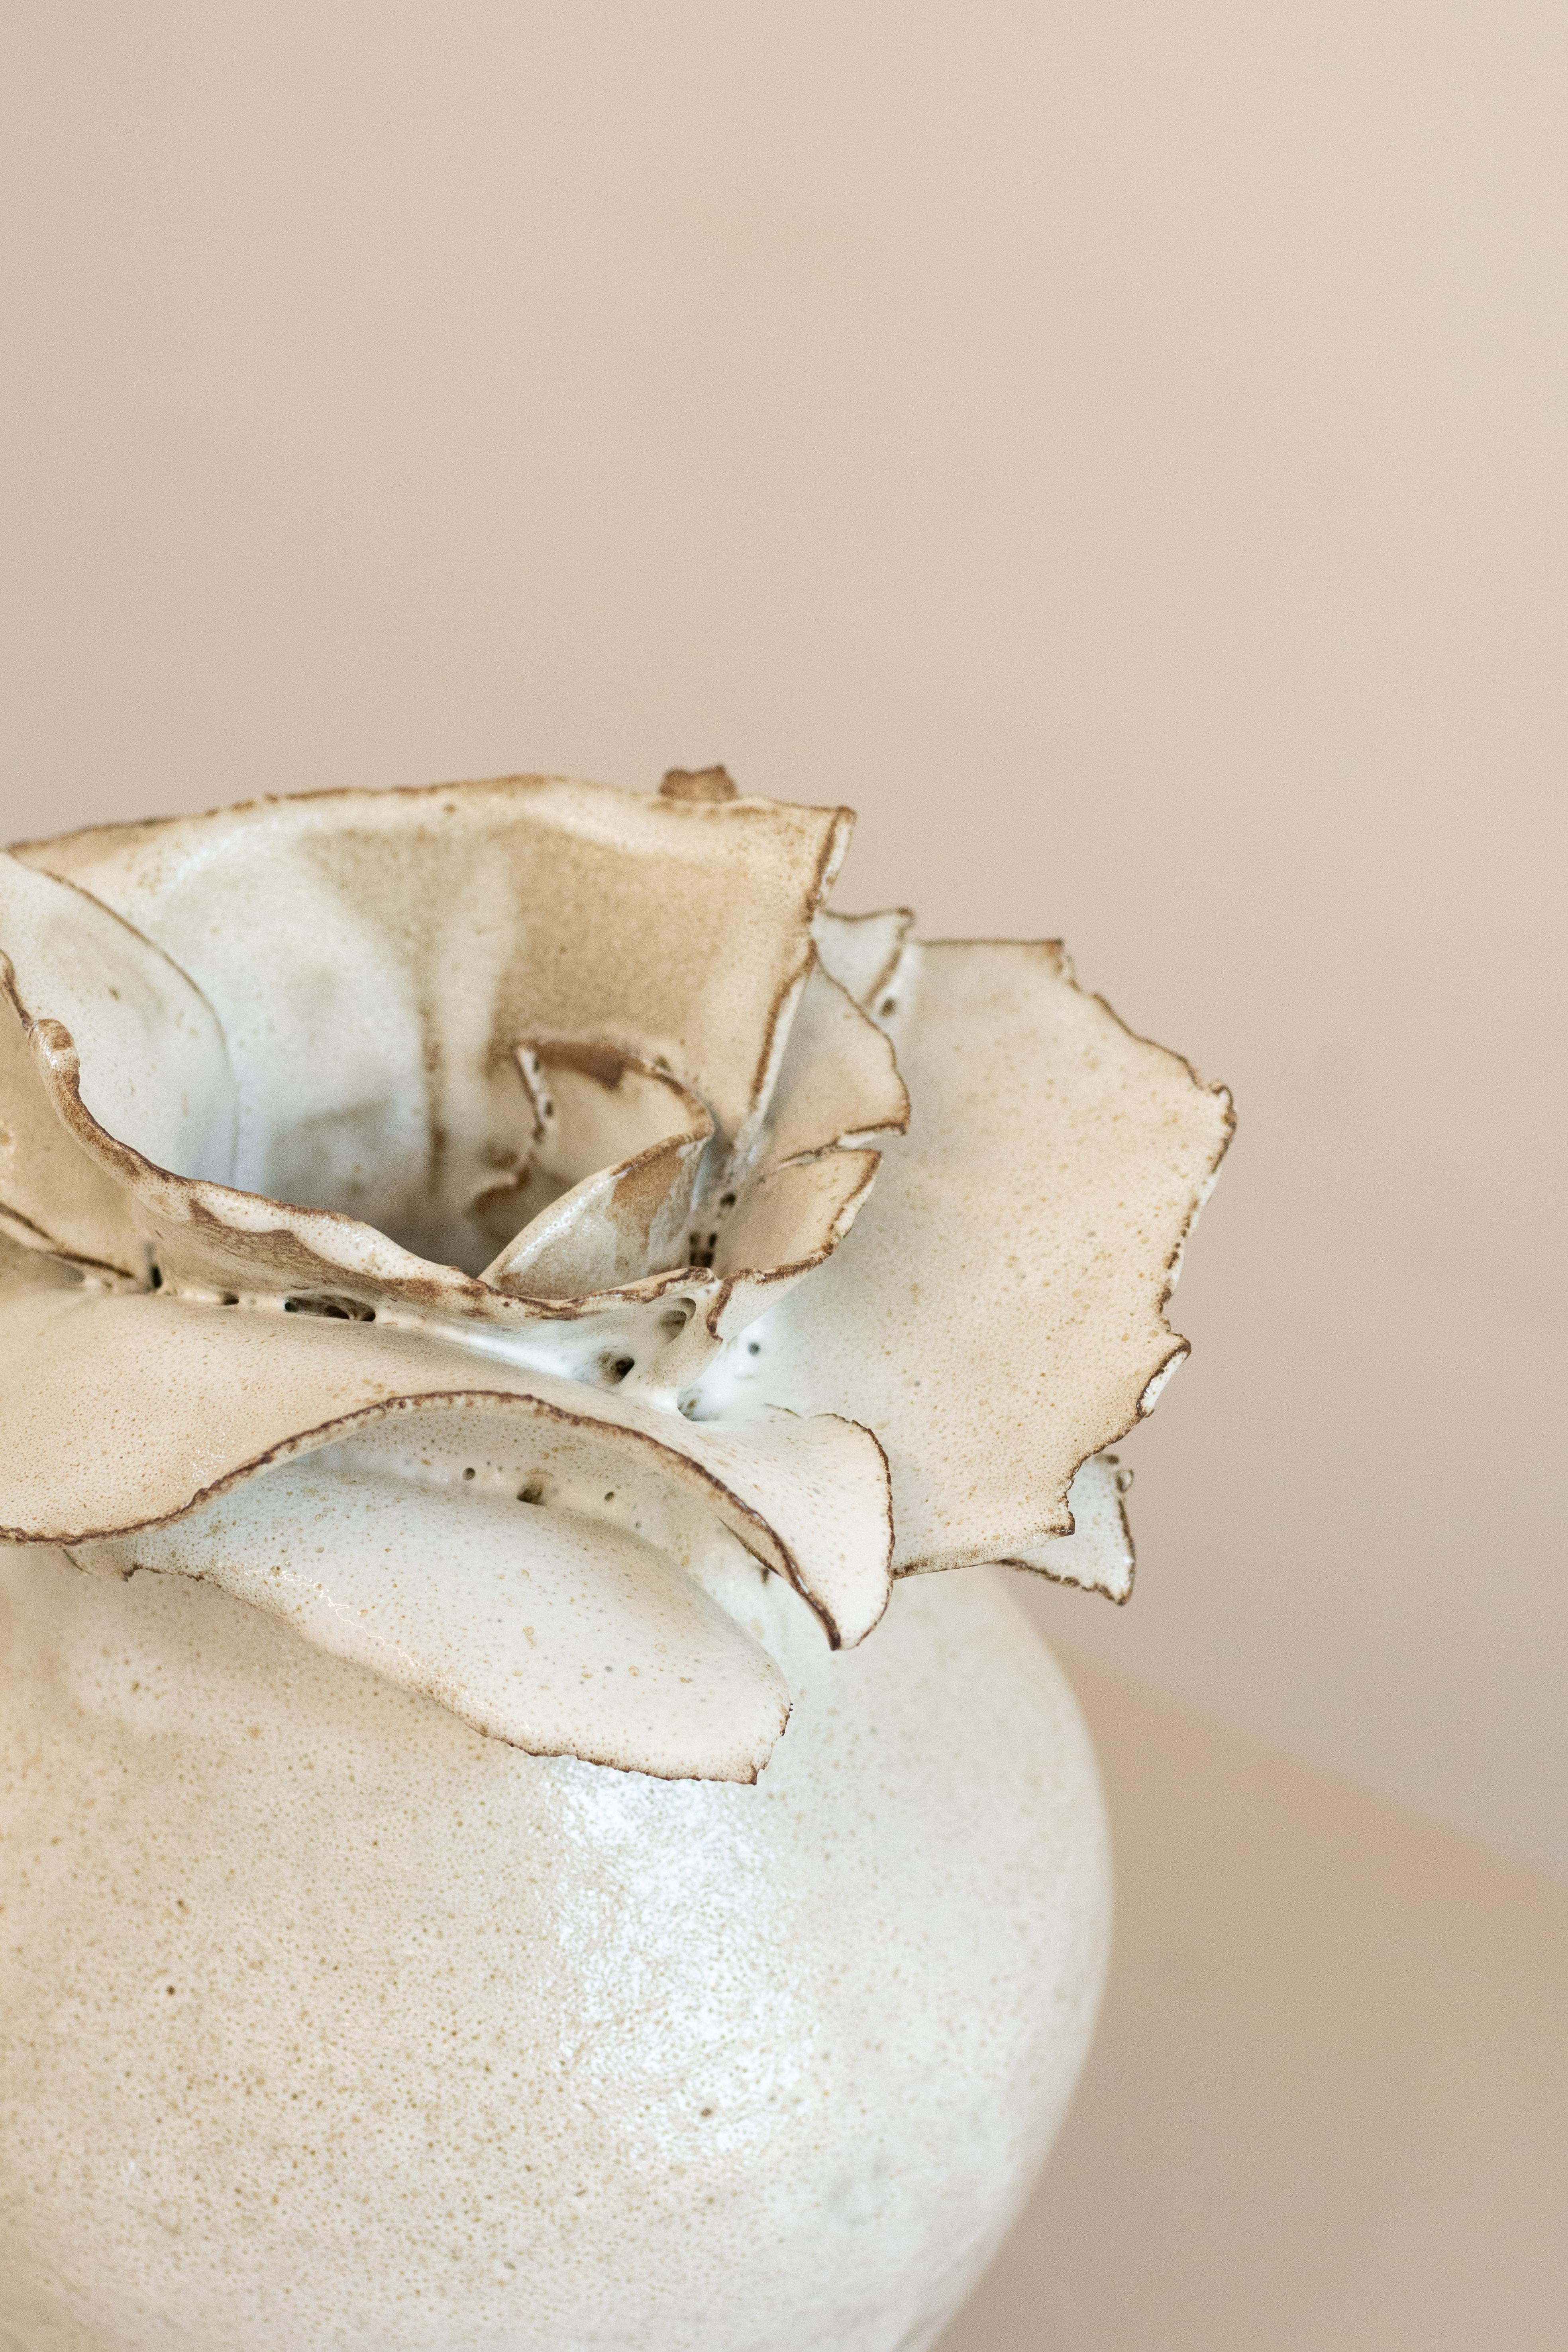 This contemporary ceramic vase was crafted by the hands of artist Andrei Detoni, piece by piece, leaving imprinted on its surface the contours and textures of his hands. Each piece is unique, with the details of its form changing with each